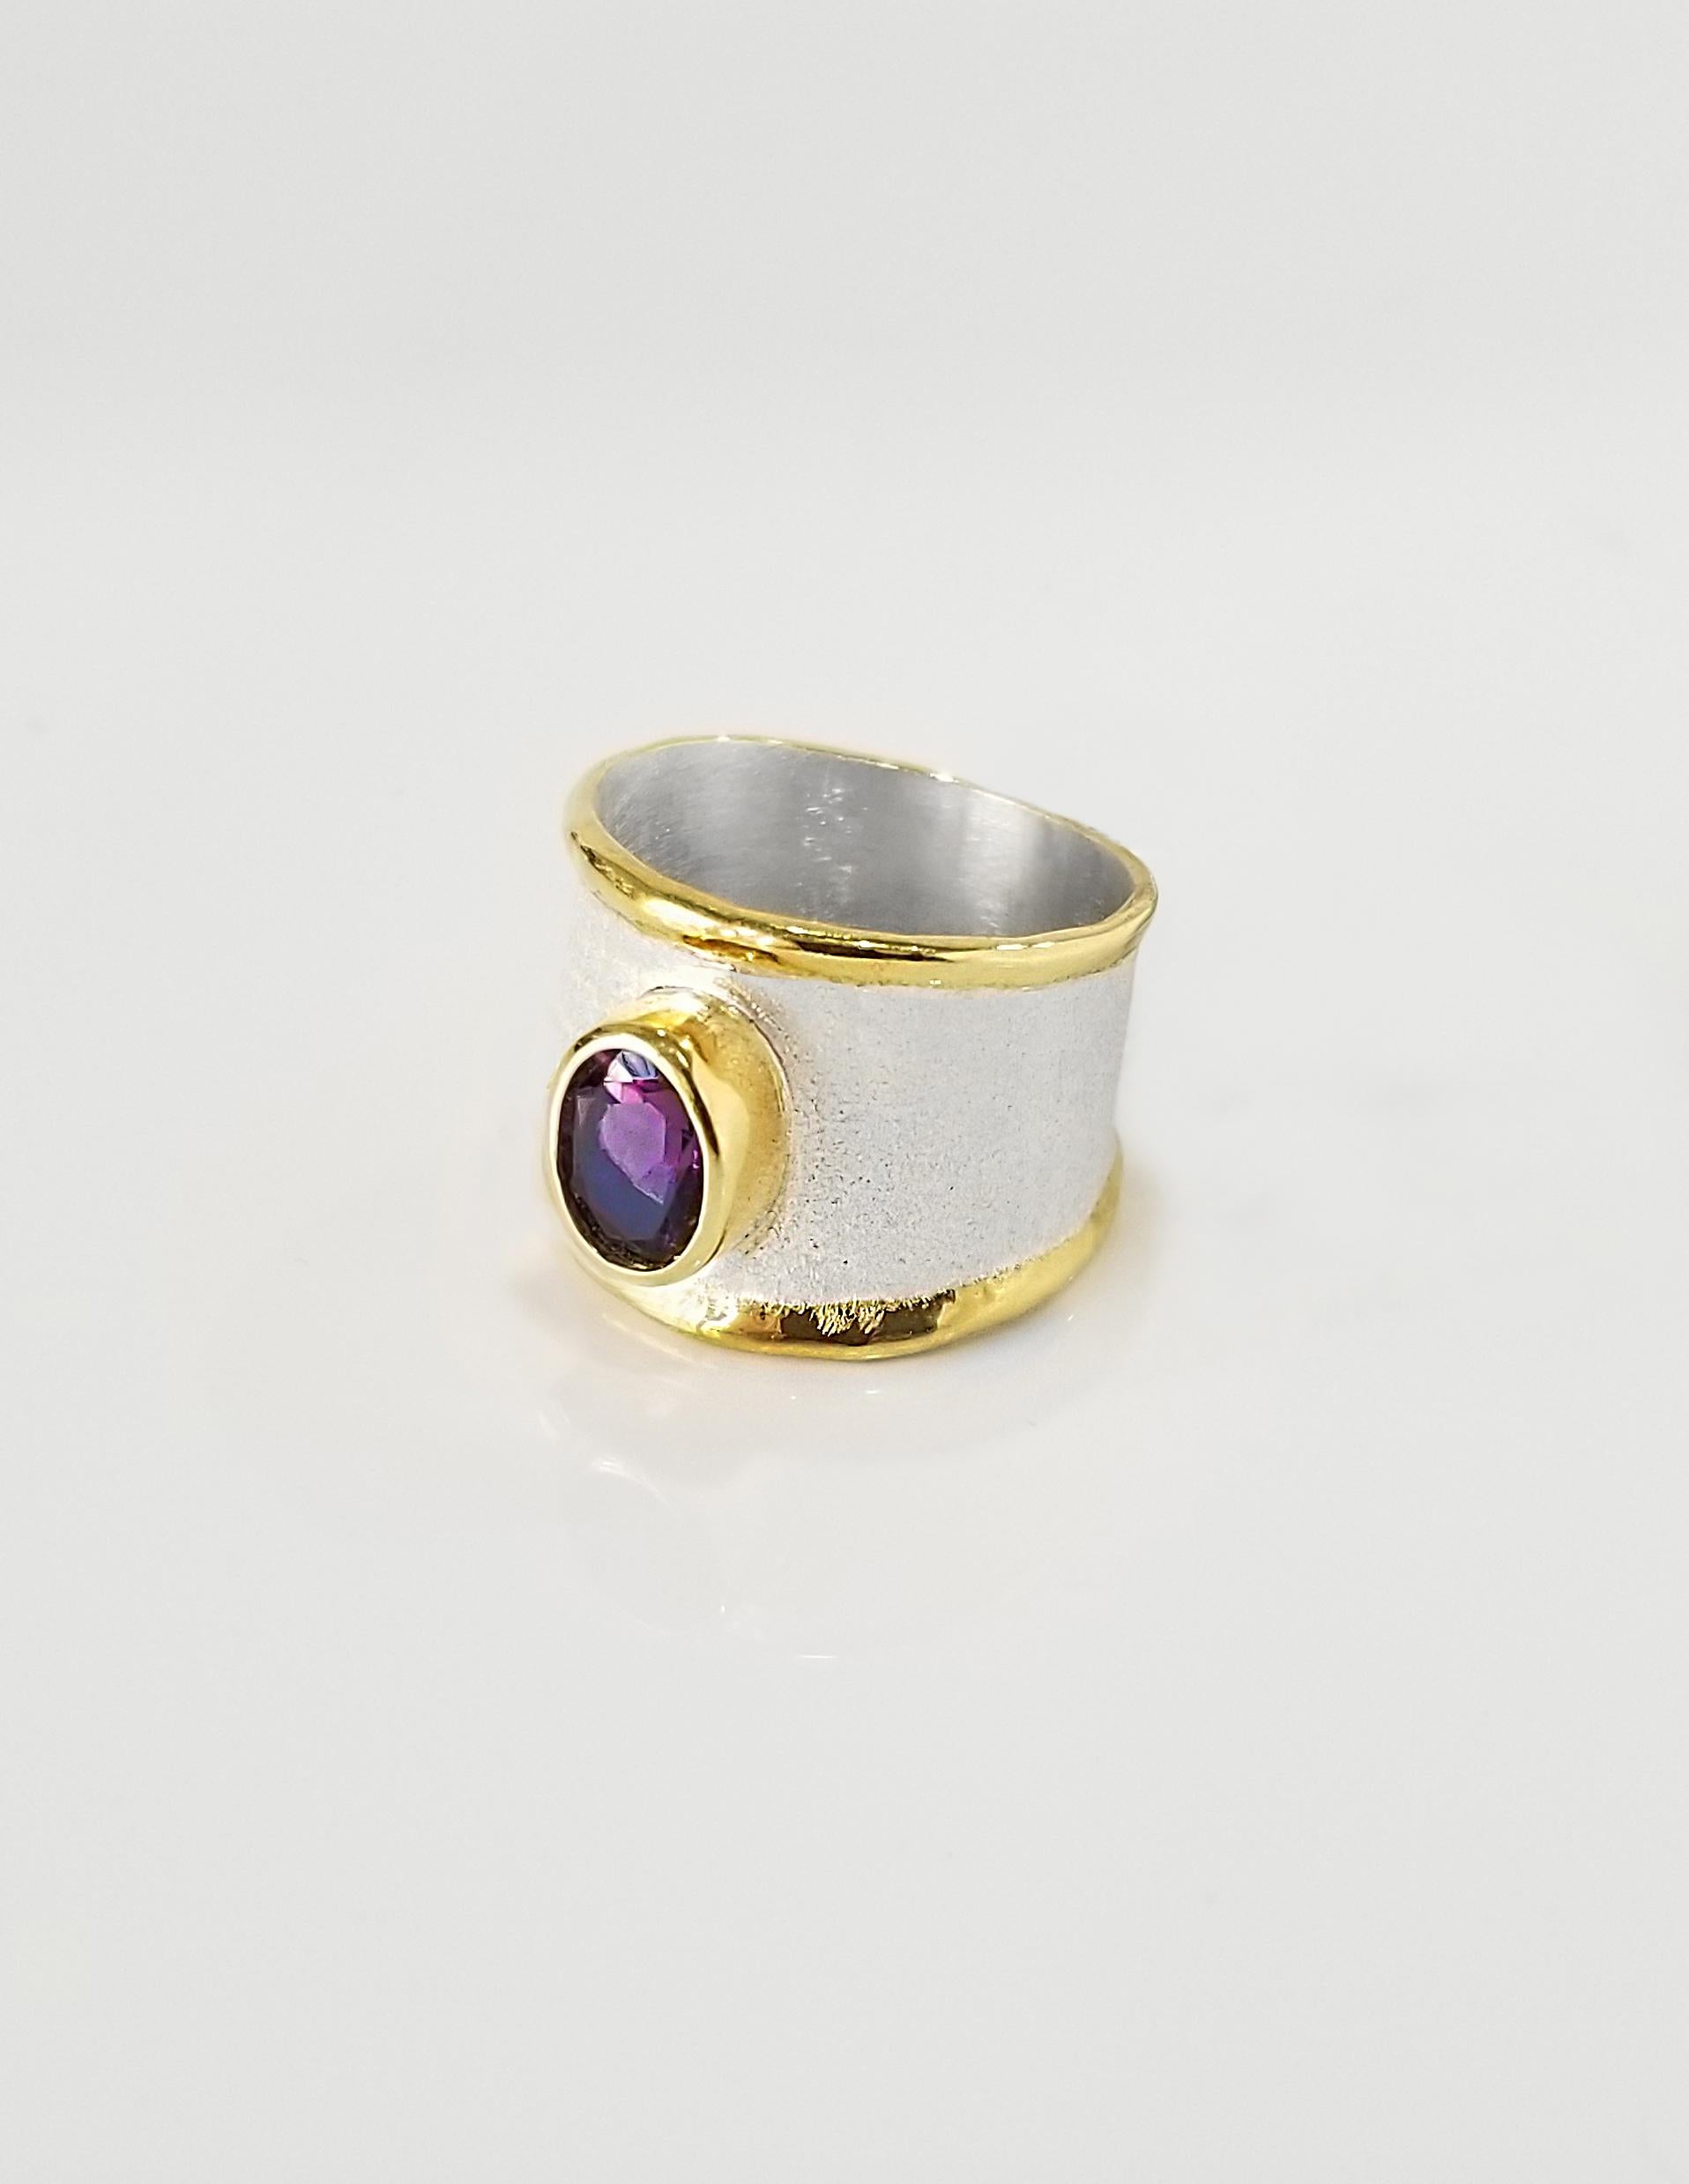 Yianni Creations Midas Collection 100% Handmade Artisan Ring from Fine Silver with a layover of 24 Karat Yellow Gold features 1.75 Carat Amethyst complemented by unique techniques of craftsmanship - brushed texture and nature-inspired liquid edges.